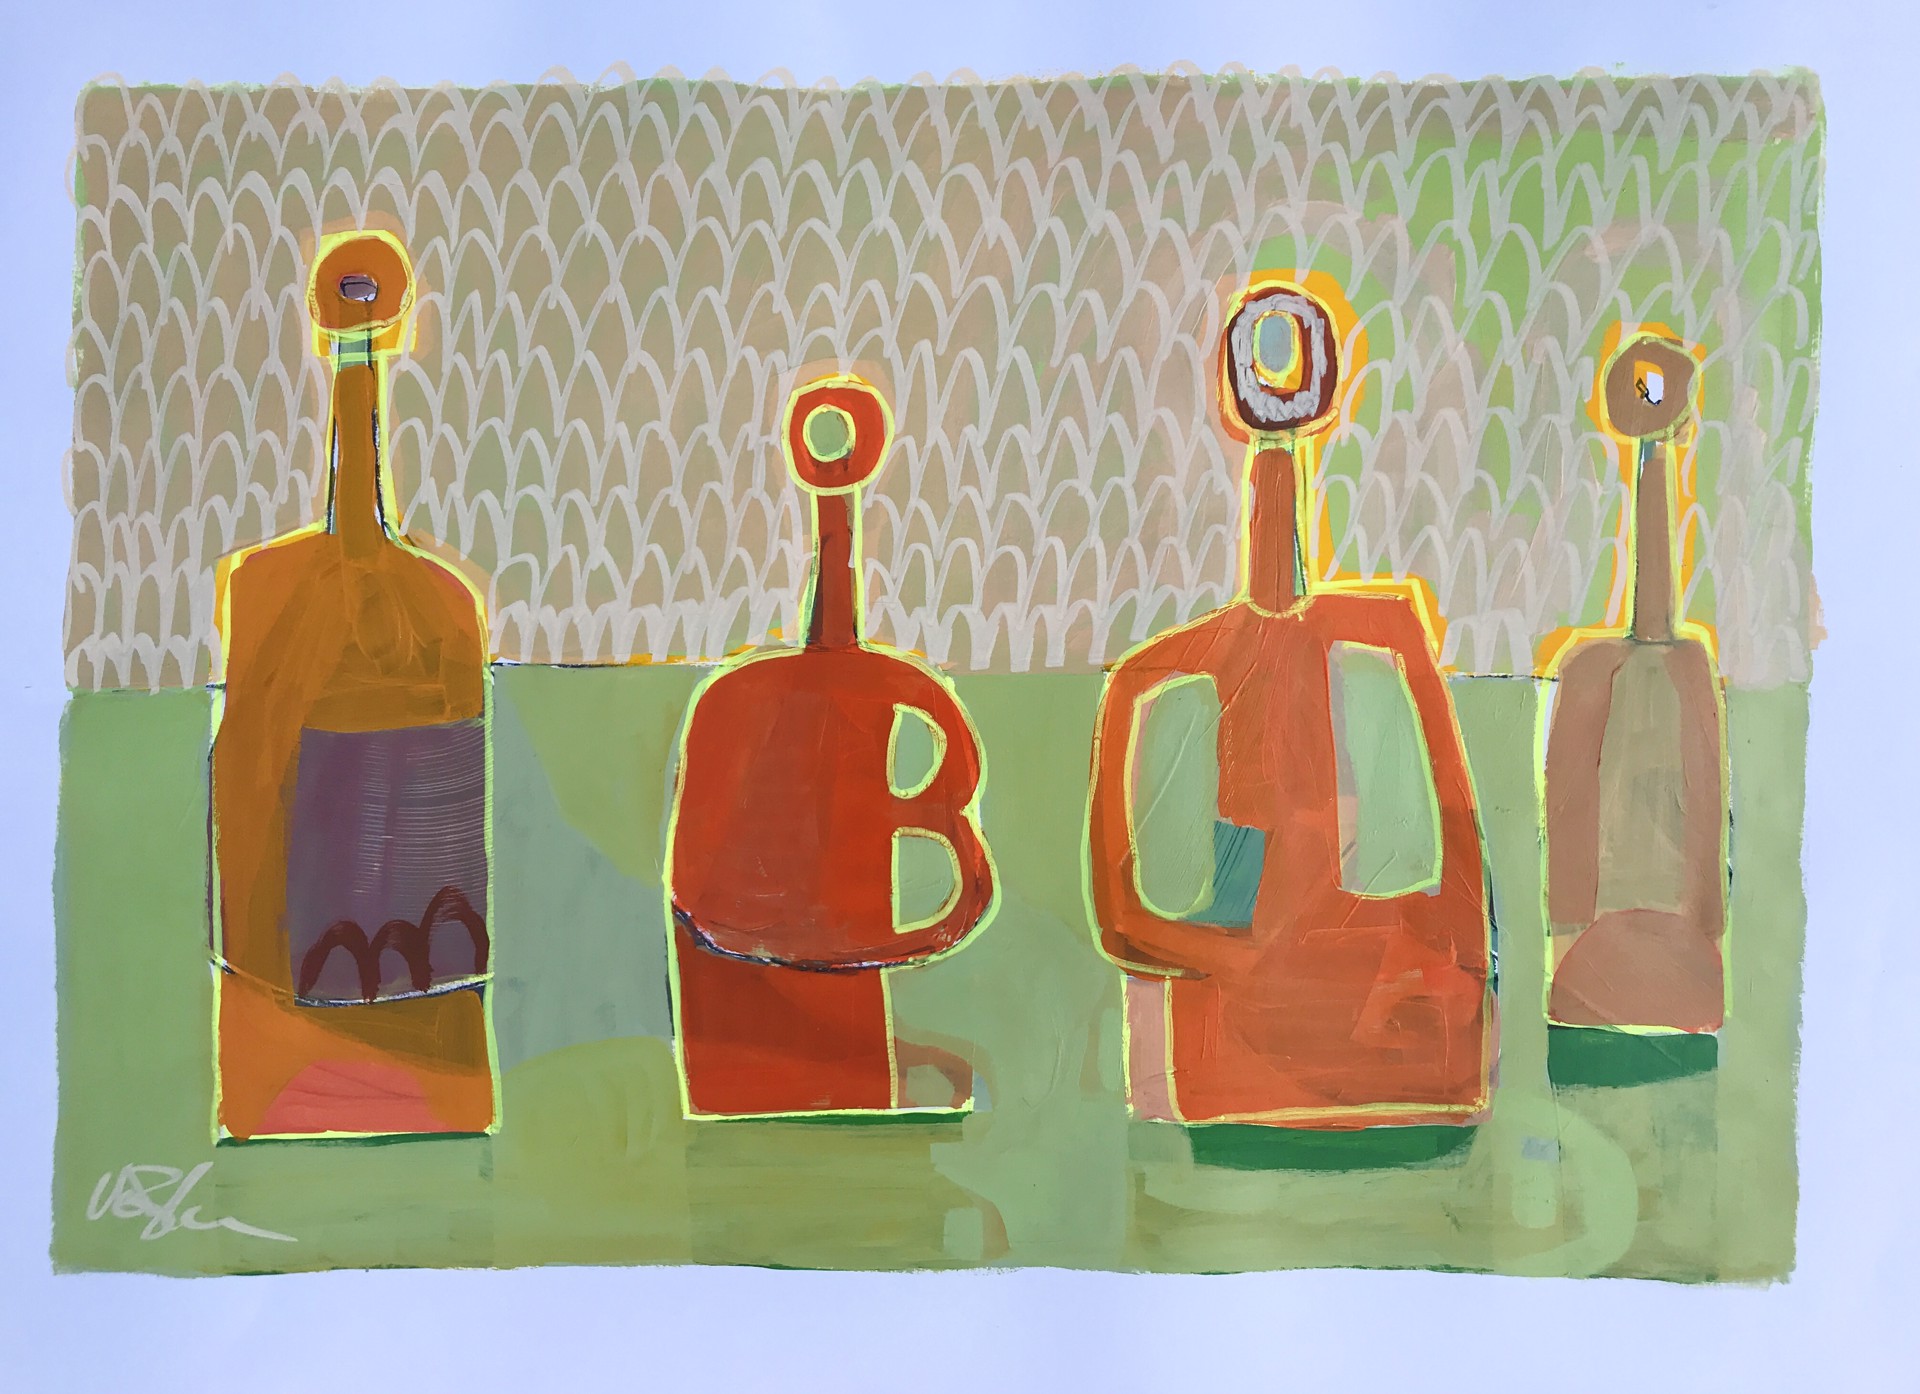 Four Red Bottles on Green Table by Rachael Van Dyke